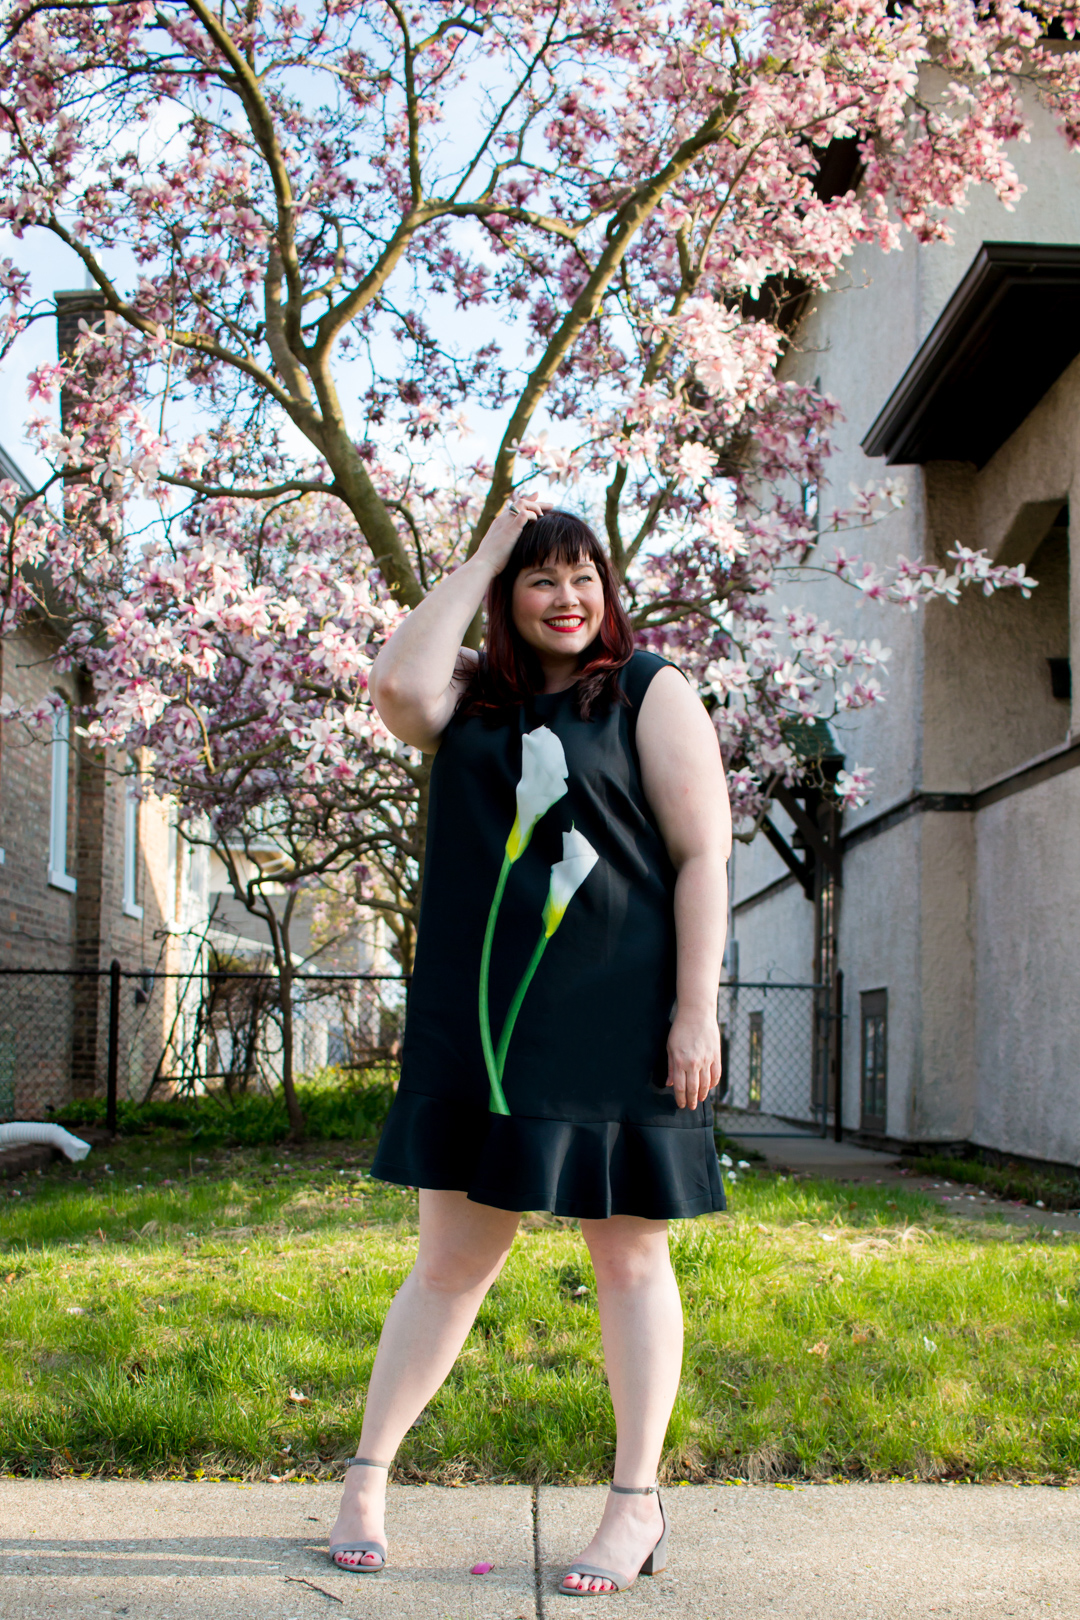 Plus Size Blogger wearing Calla Lily Dress from Victoria Beckham x Target collection